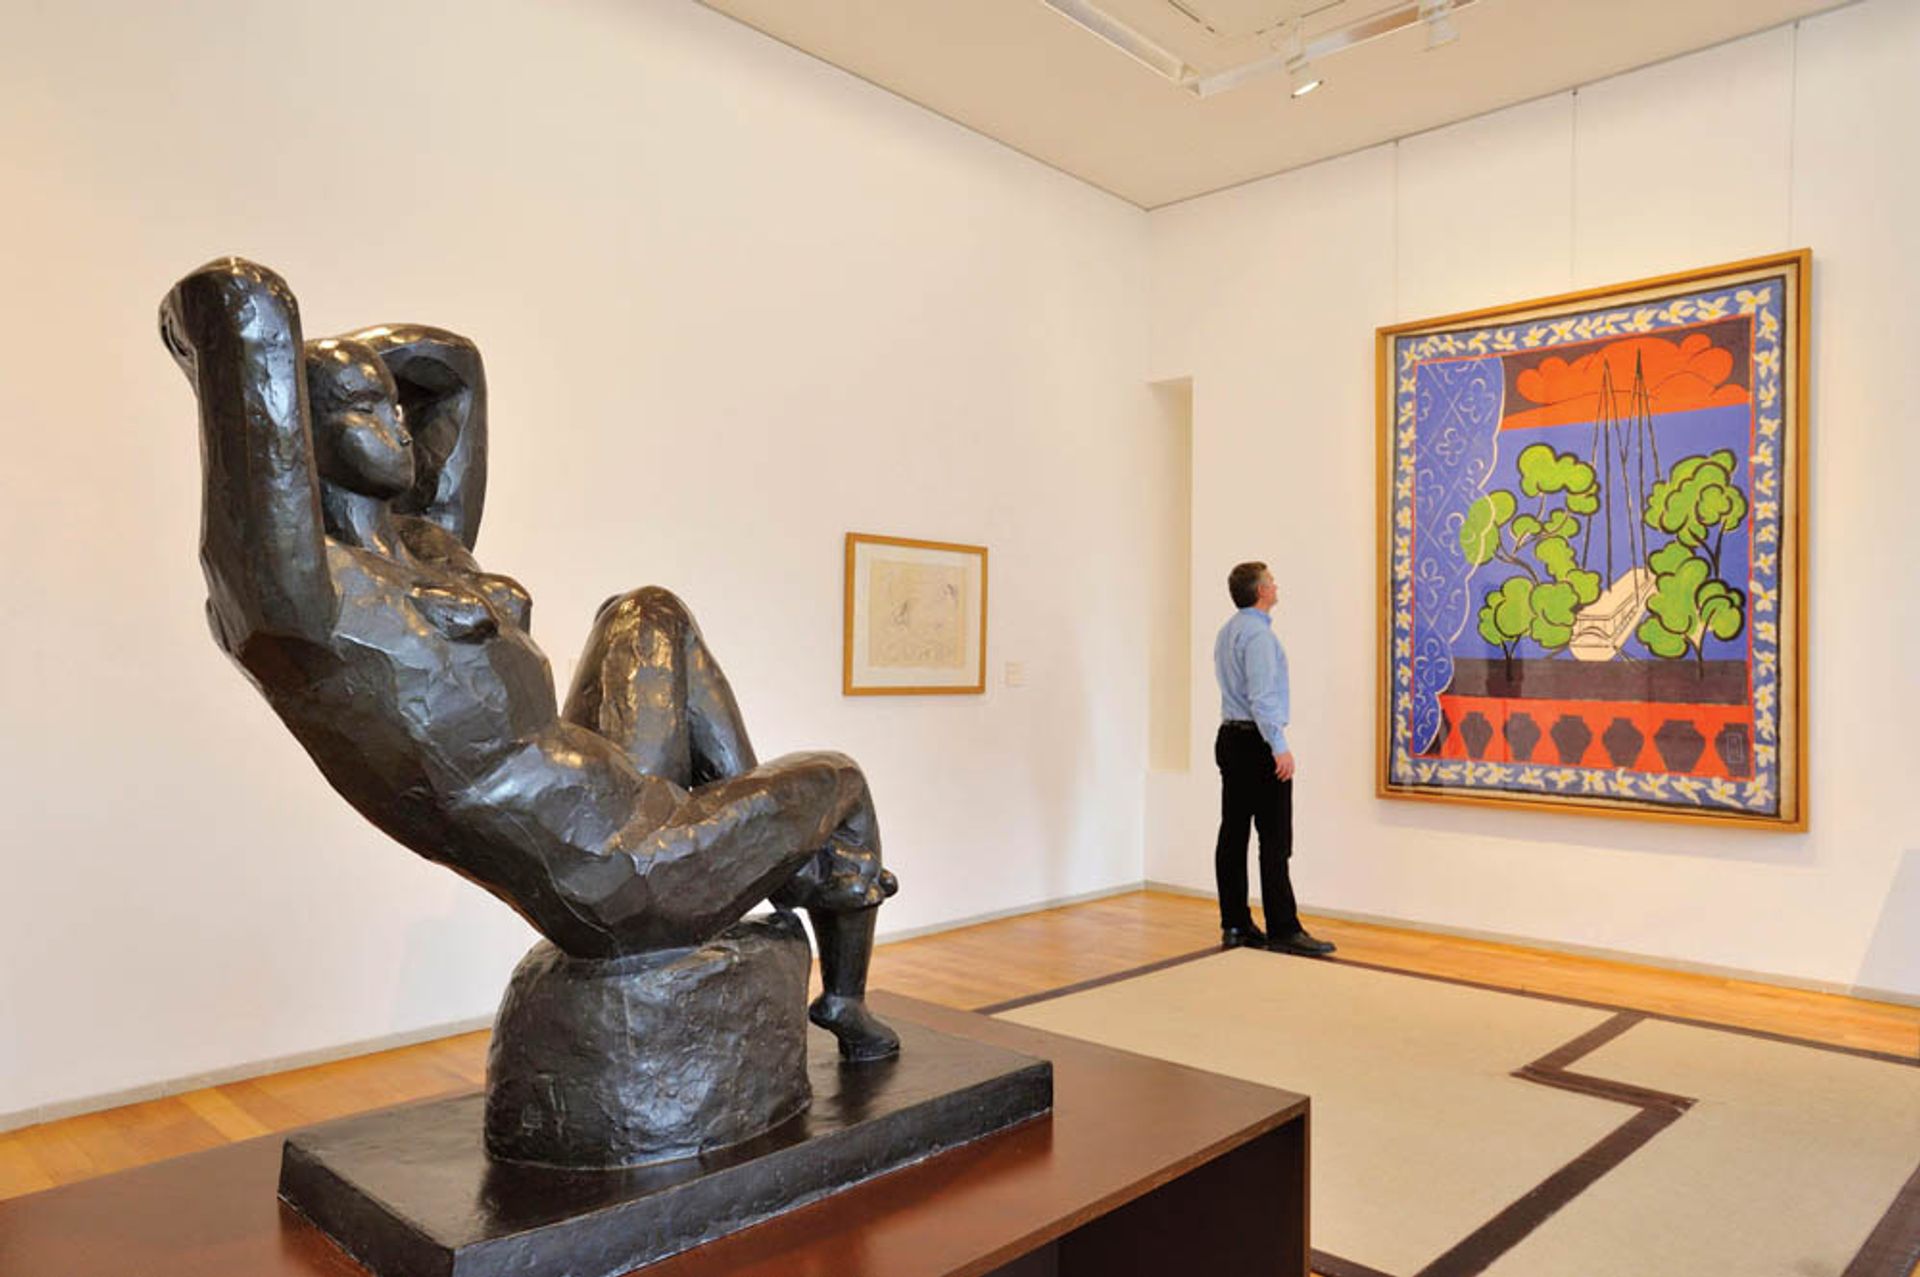 State-run Musée Matisse le Cateau-Cambrésis suspended loans for Beijing exhibition due to “political ties between Russia and China”